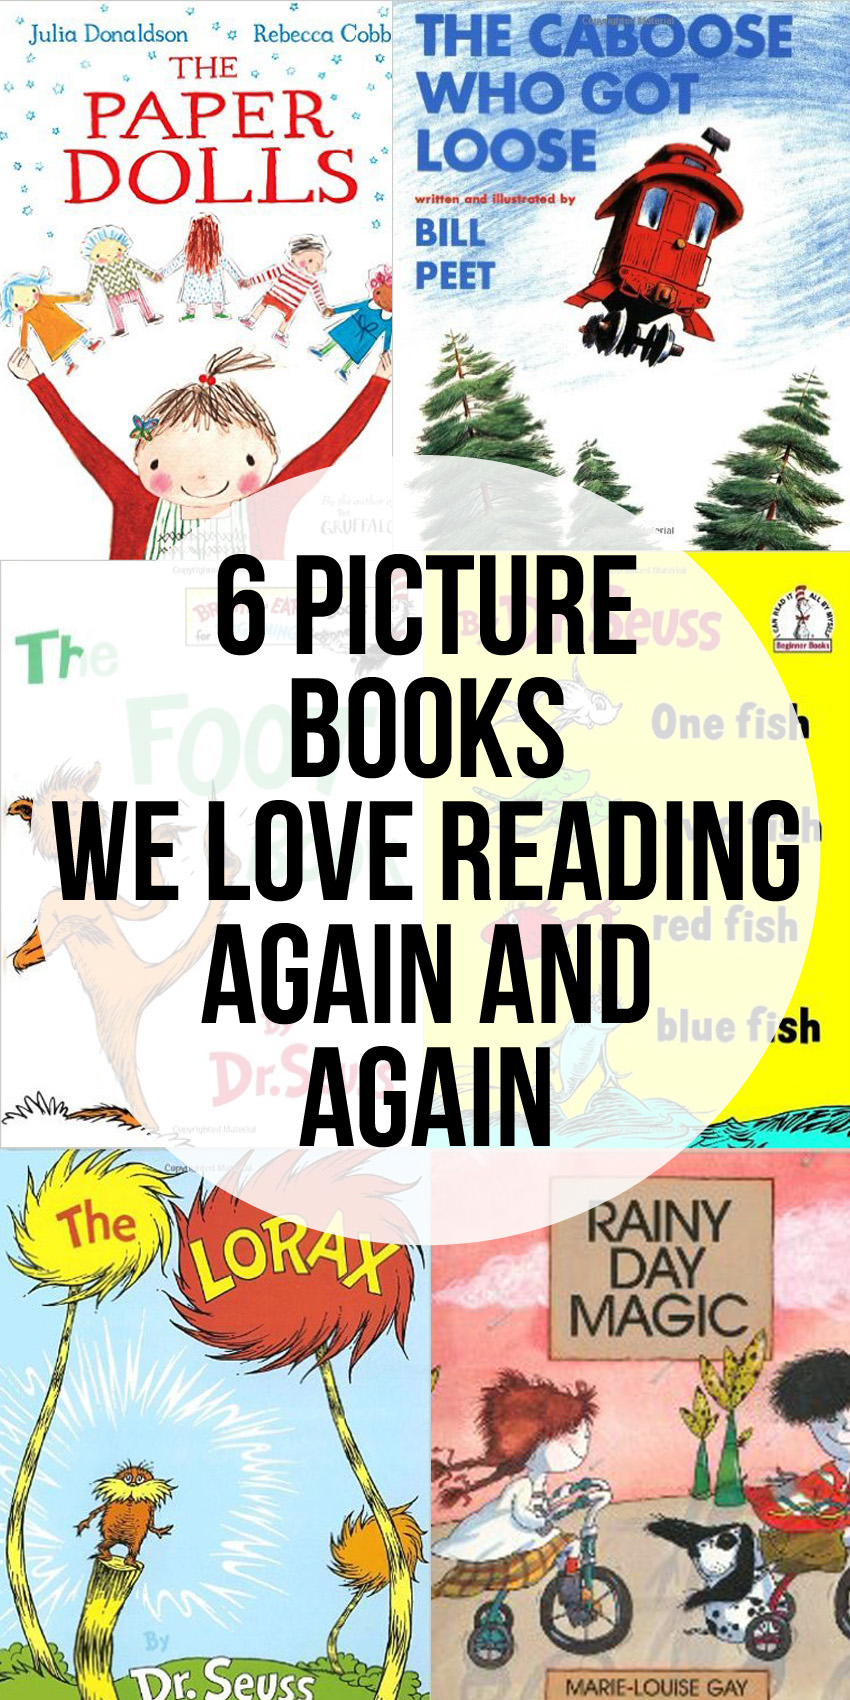 6 Picture Books We Love Reading Again and Again - if we were to only own 6 picture books, these would be them.